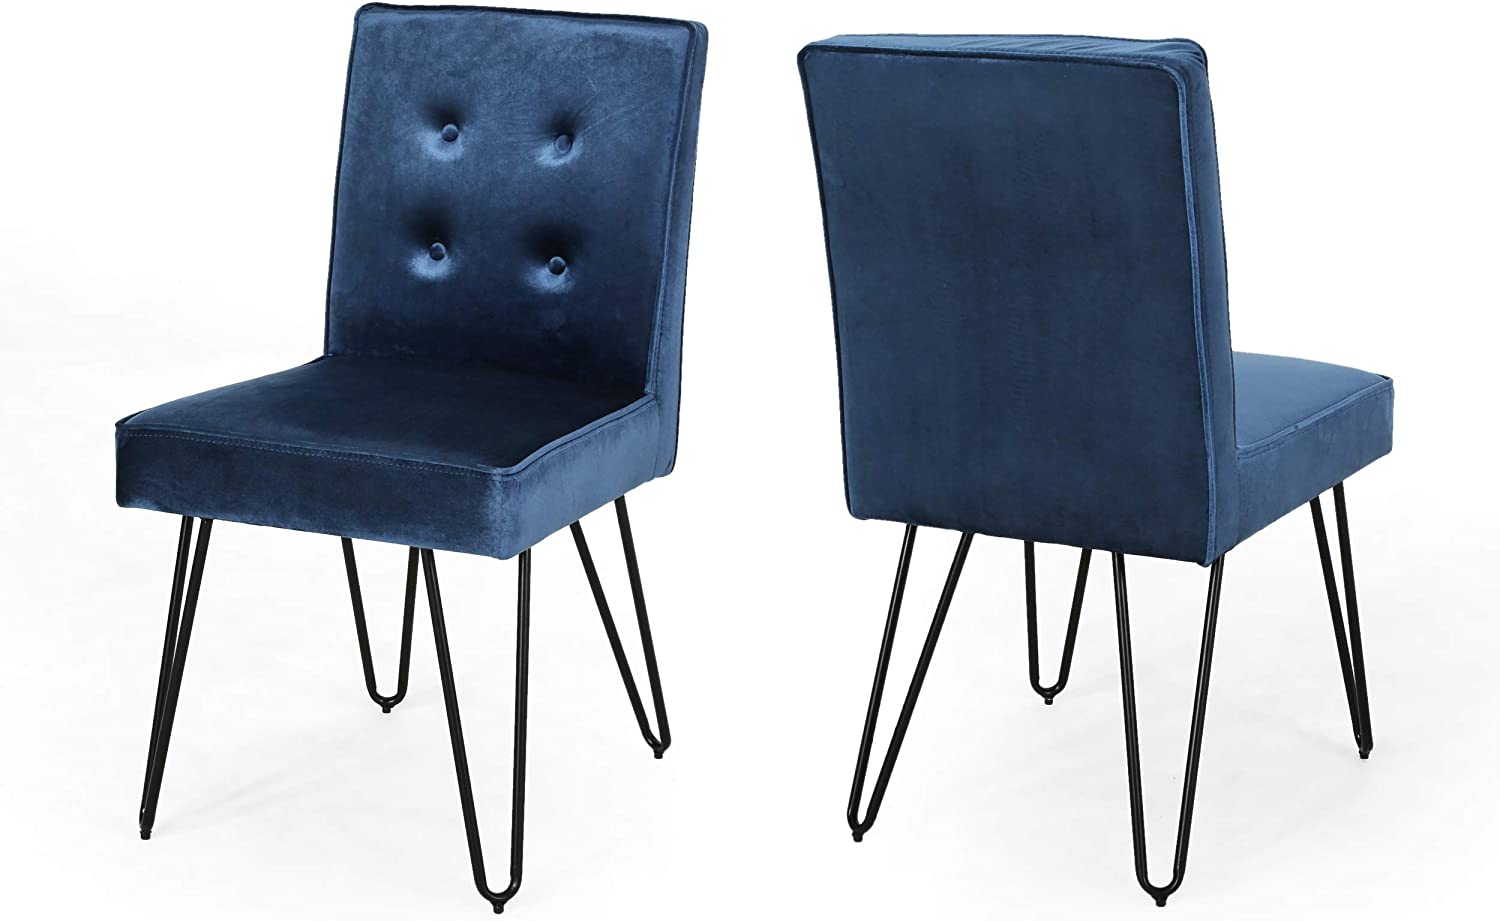 B07NZM511D Natalie Glam Tufted Velvet Dining Chairs with Iron Legs (Set of 2), Cobalt and Black Finish